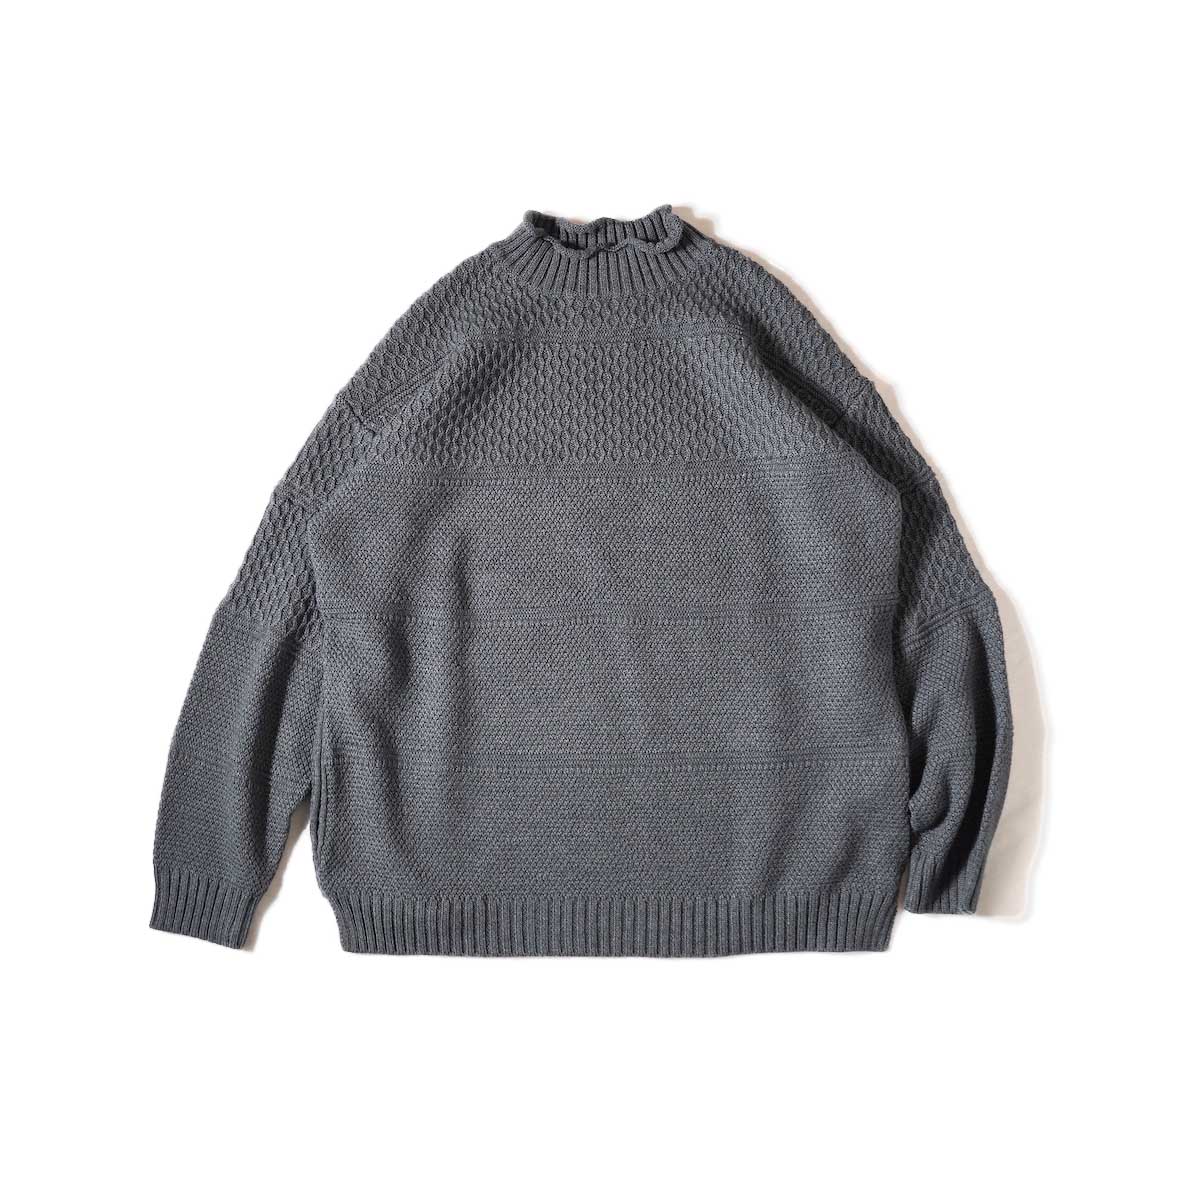 CURLY / BIG SILHOUETTE WAFFLE P/O KNIT (Gray)